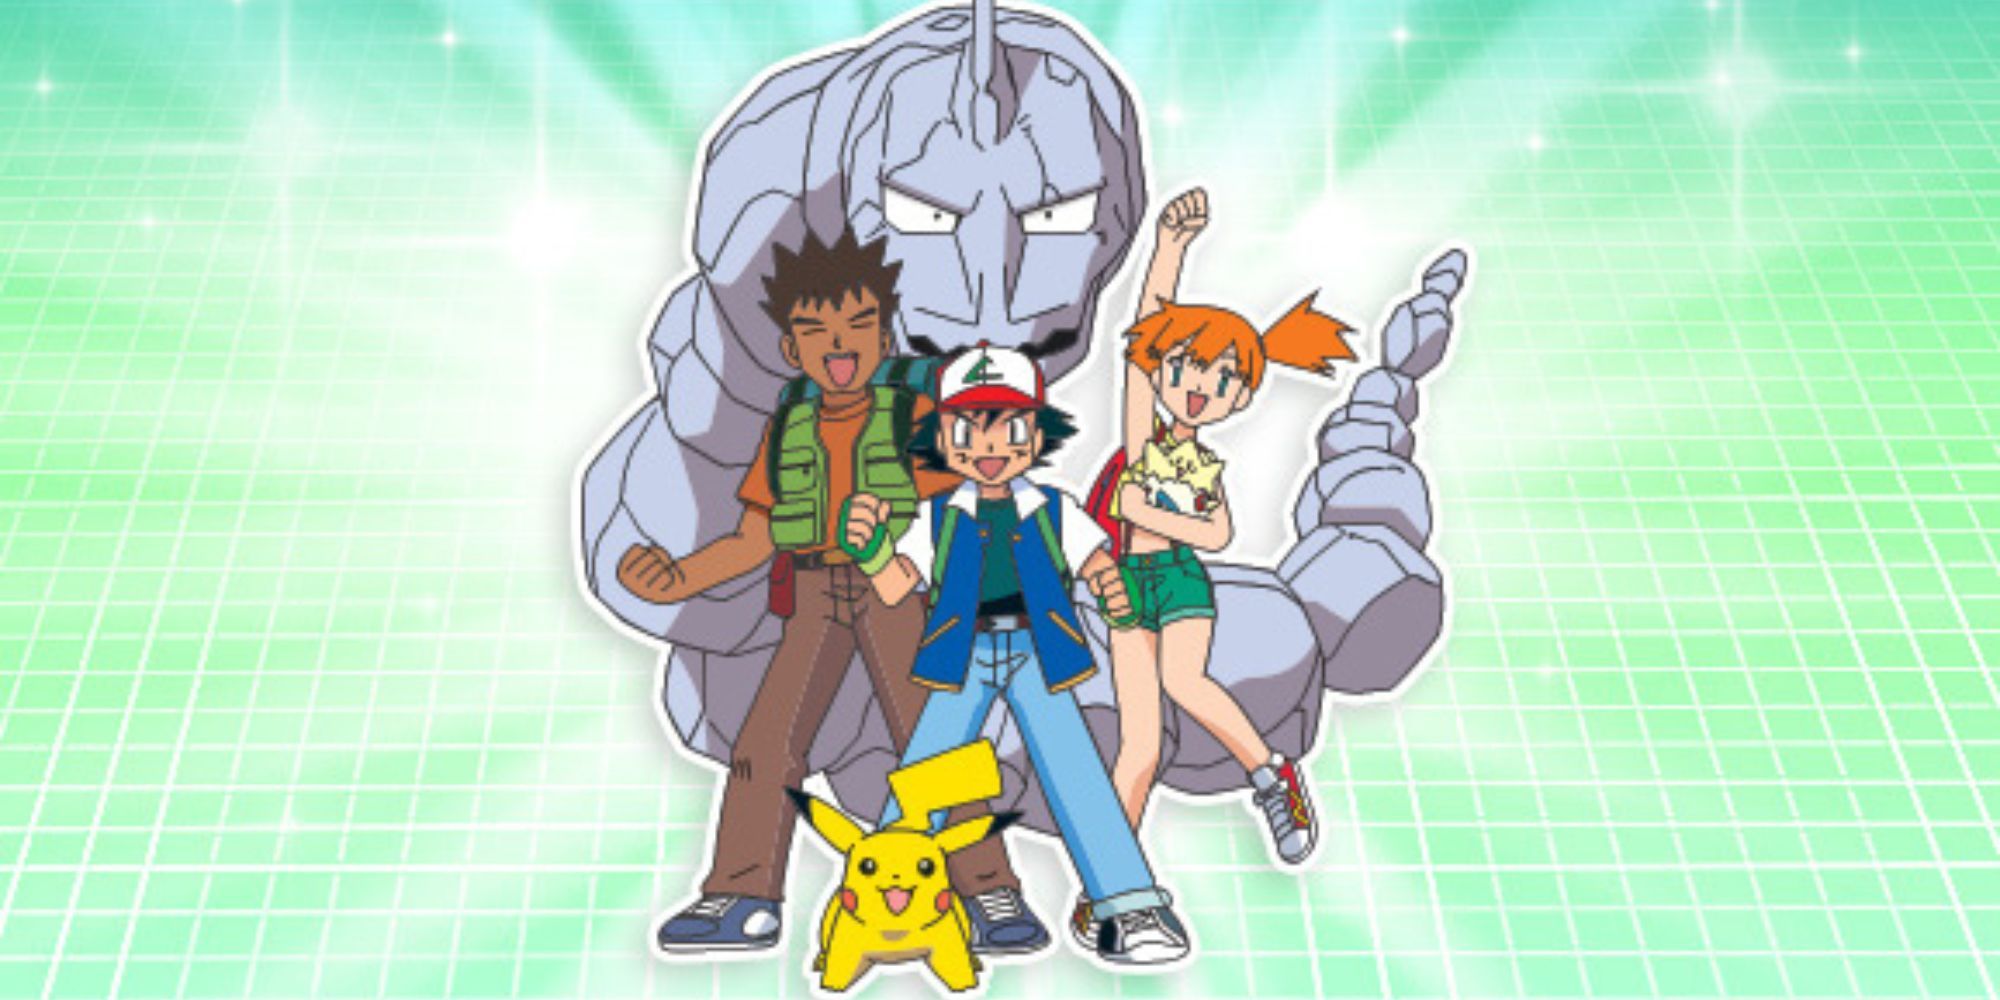 Ash, Brock, and Misty pose with Onix and Pikachu